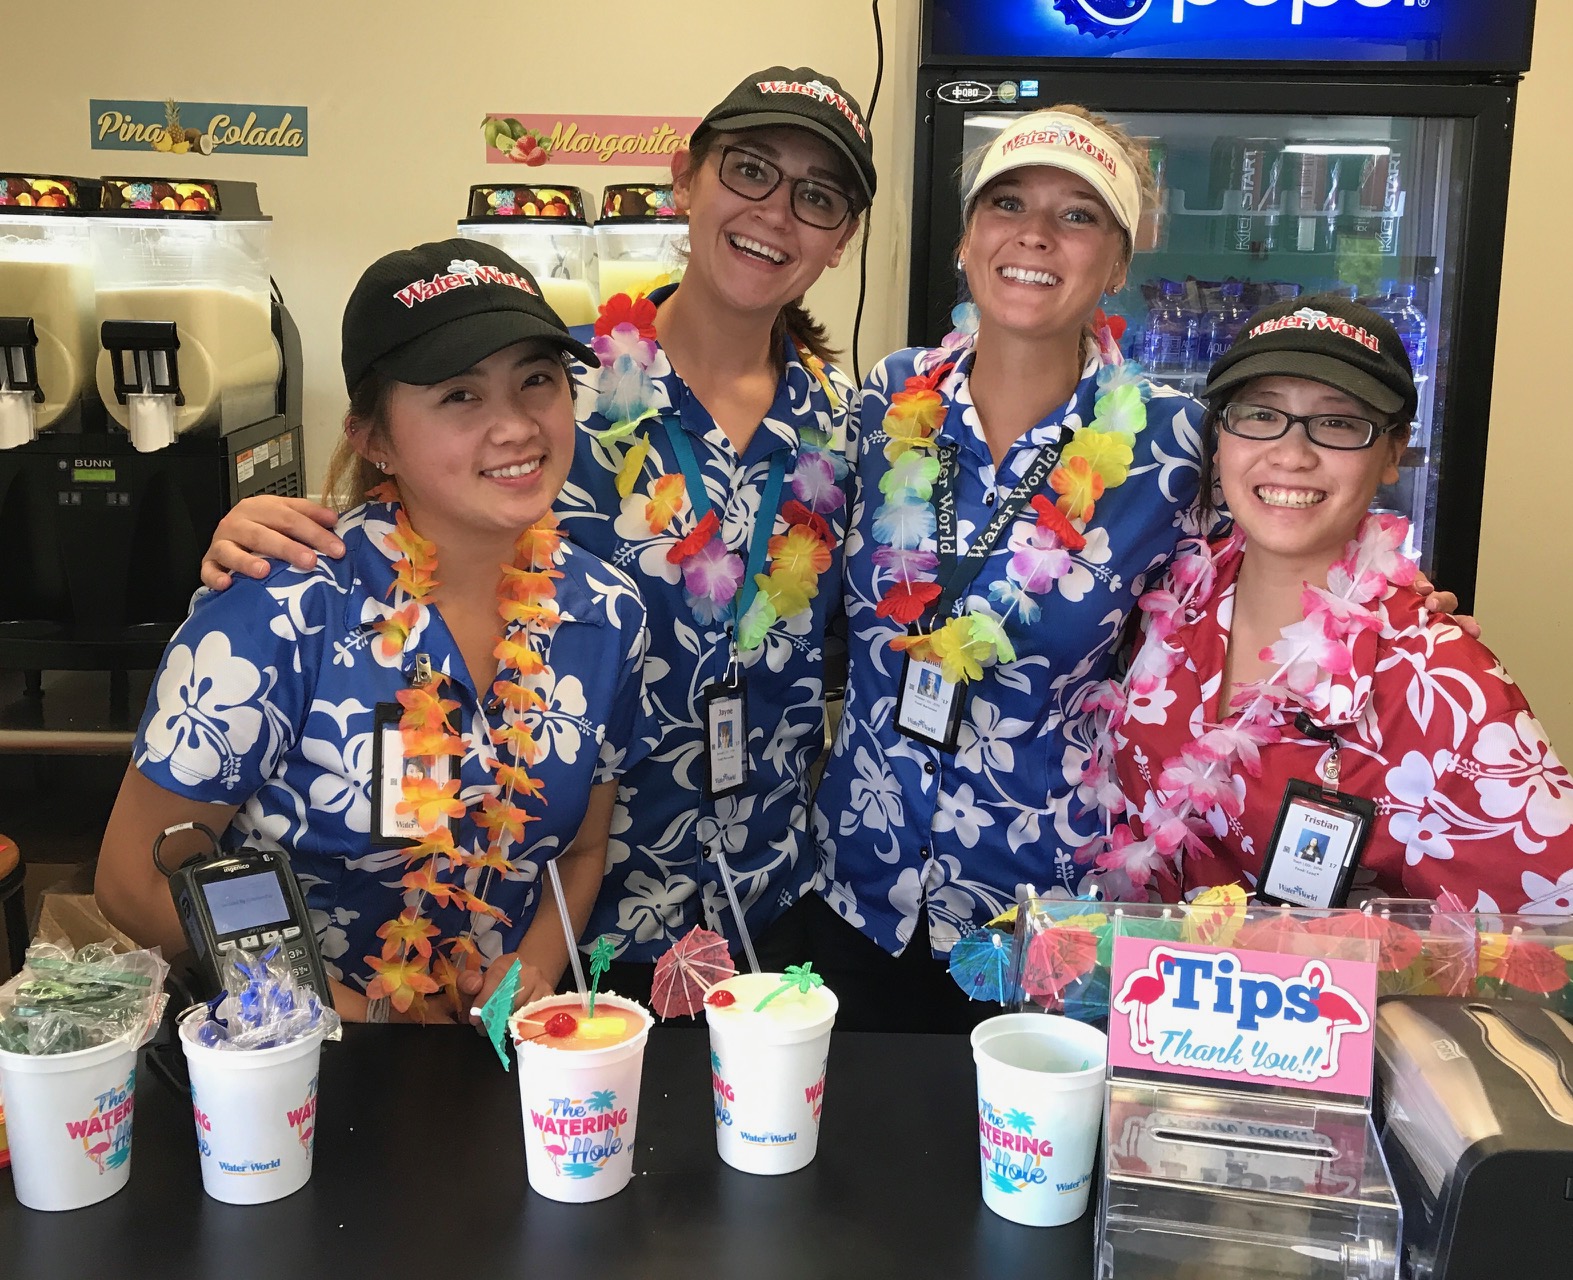 Four women in Hawaiian shirts and leis pose for a photo behind a food stand at Water World.